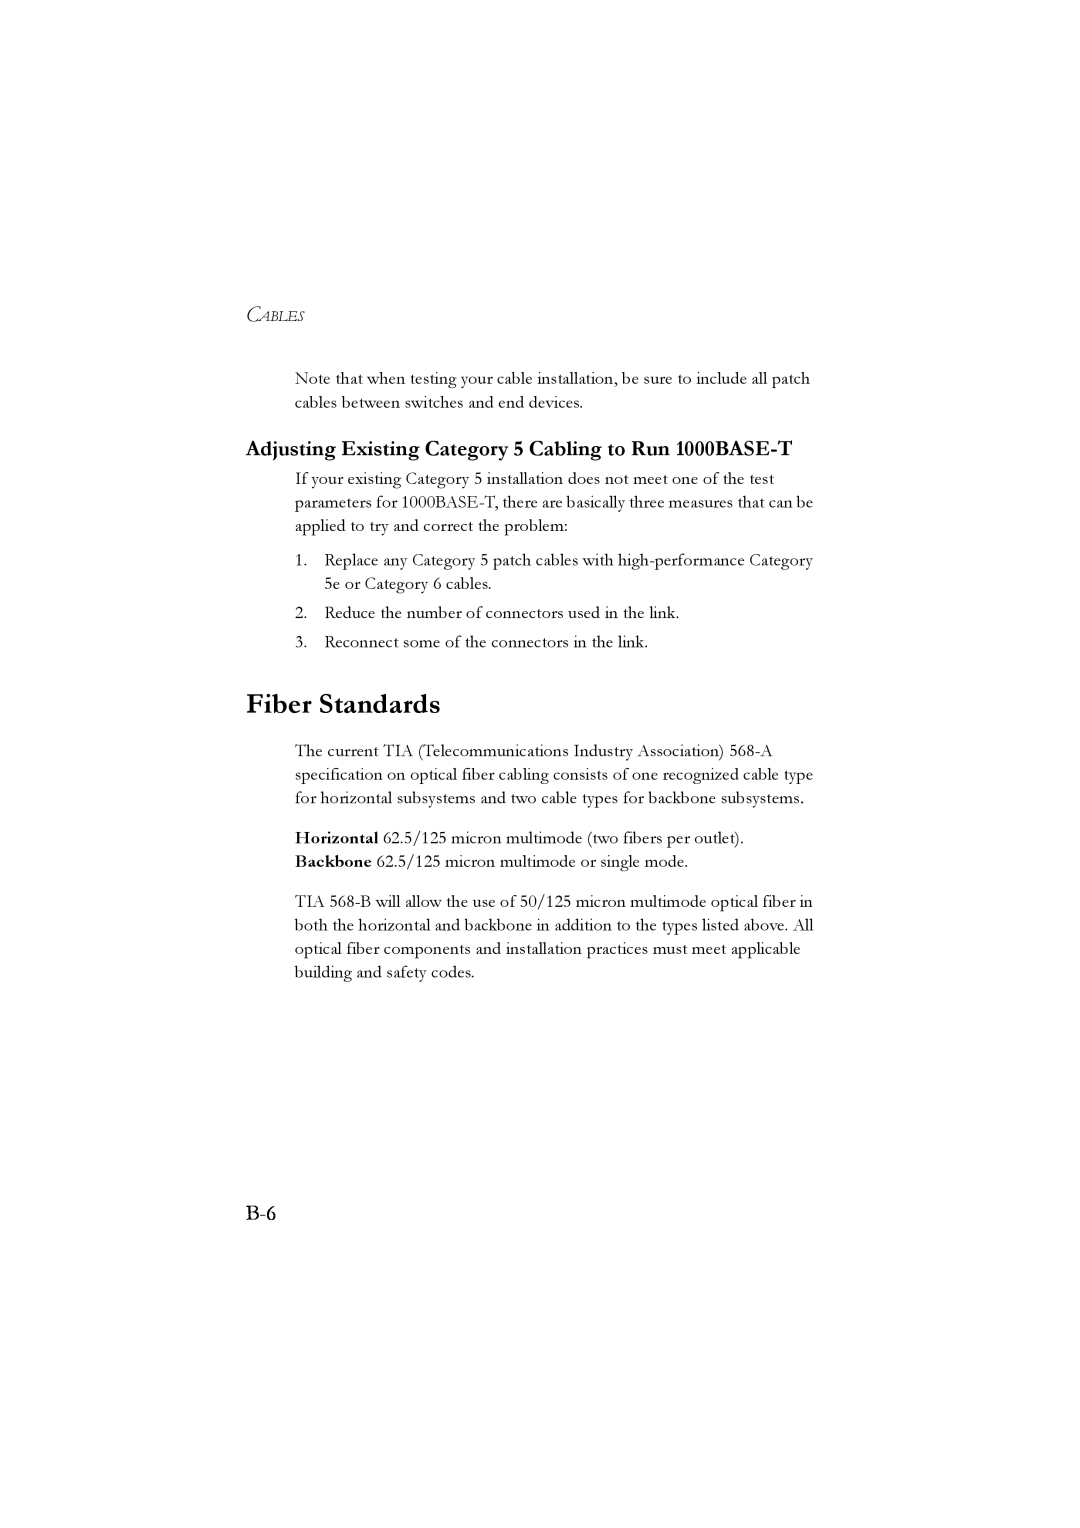 LevelOne GSW-2476 user manual Fiber Standards, Adjusting Existing Category 5 Cabling to Run 1000BASE-T 